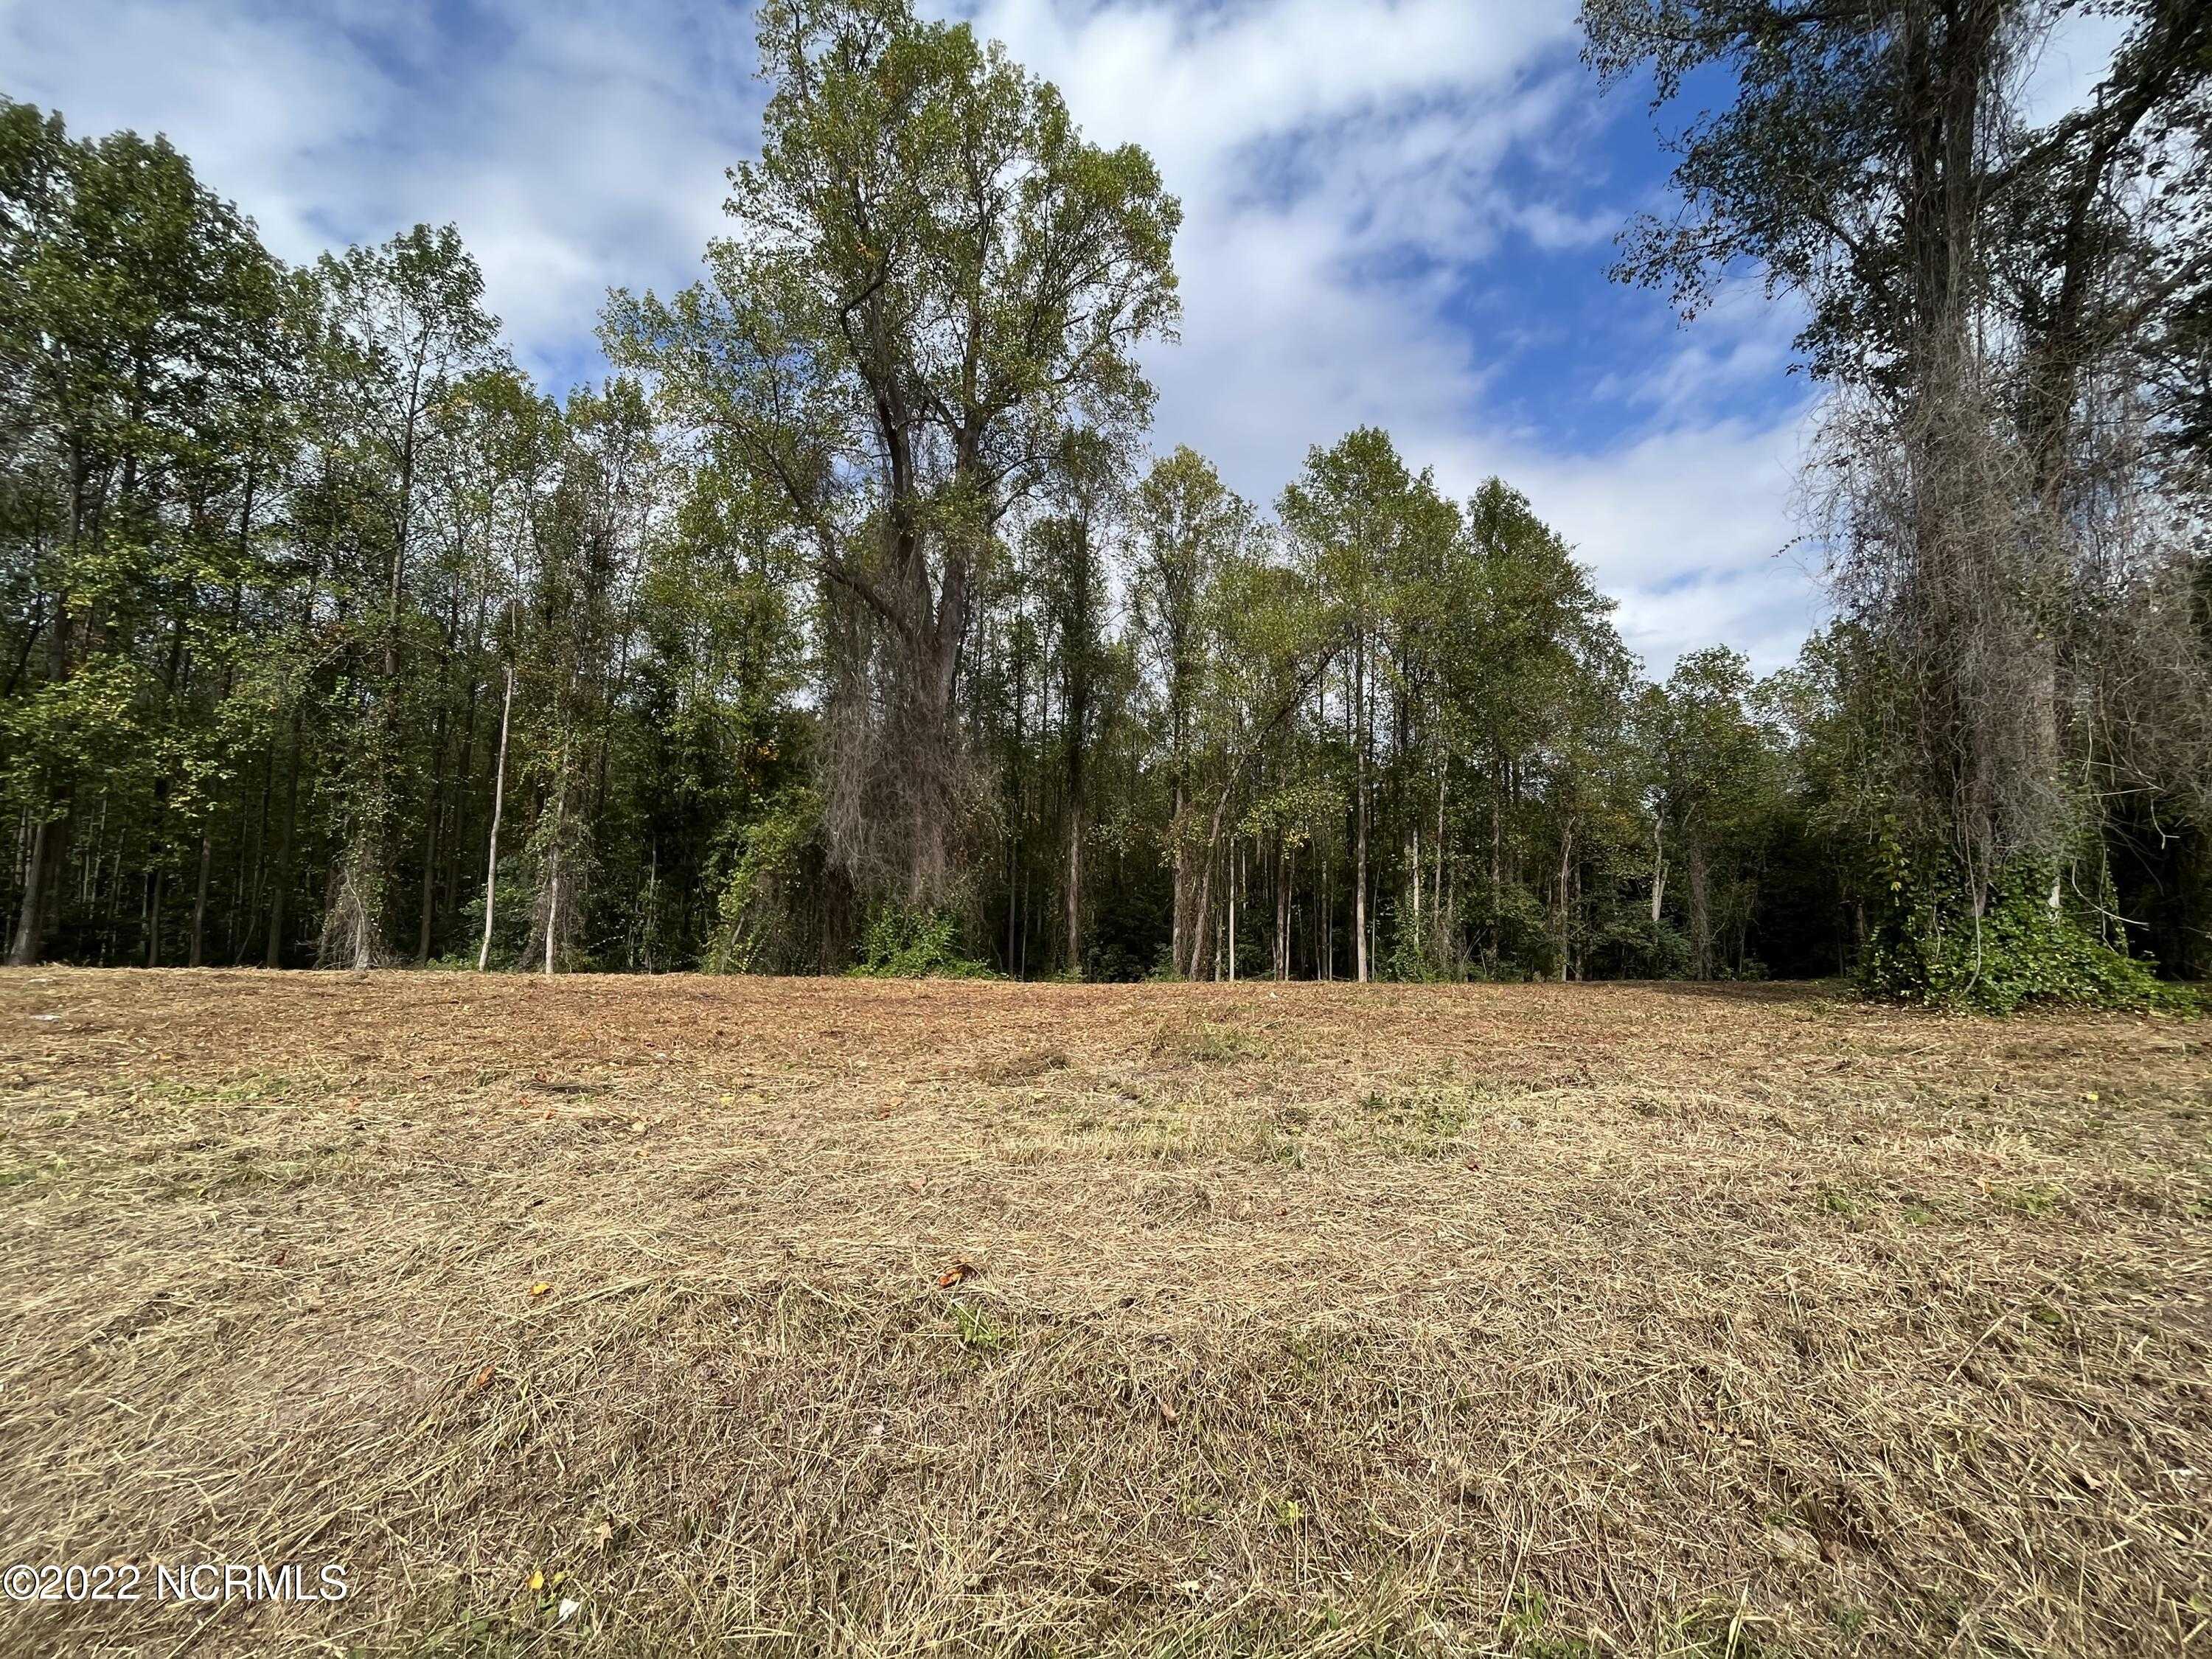 Photo 1 of 3 of Lot B Tyree Road land